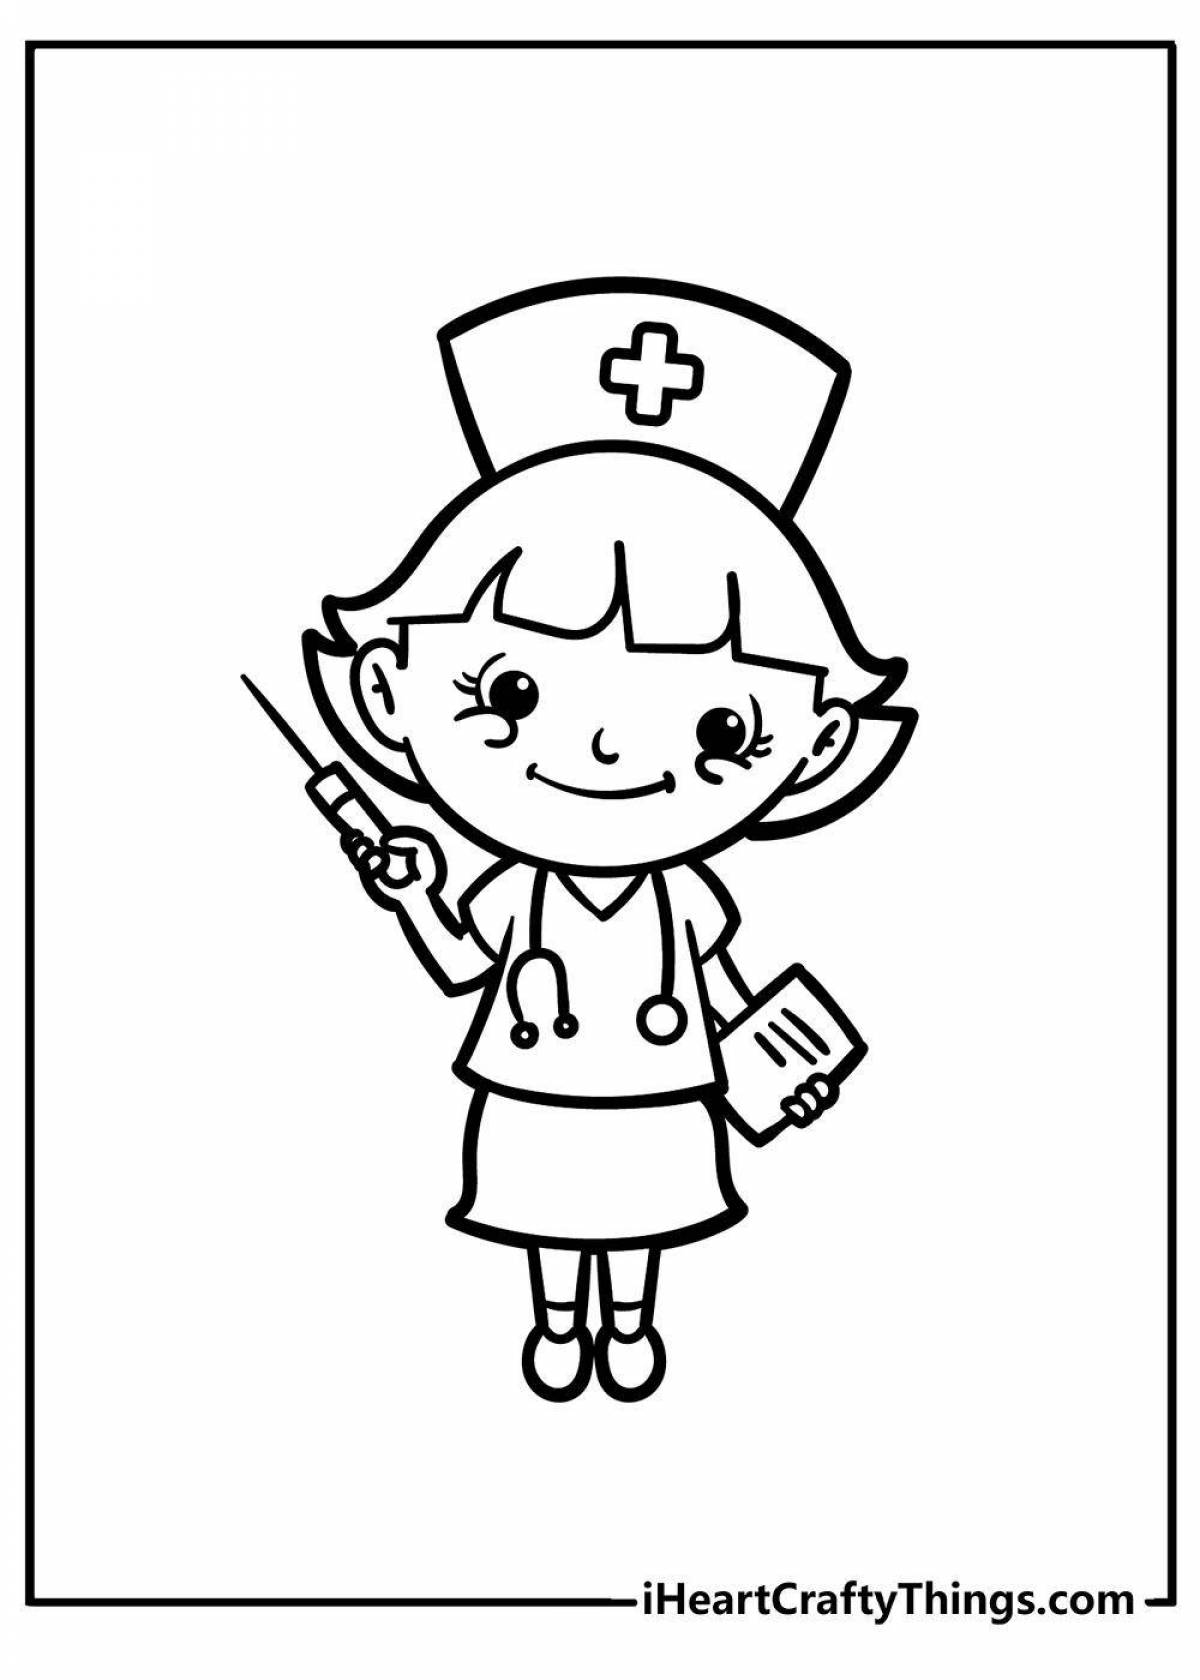 Distinctive military nurse coloring pages for kids